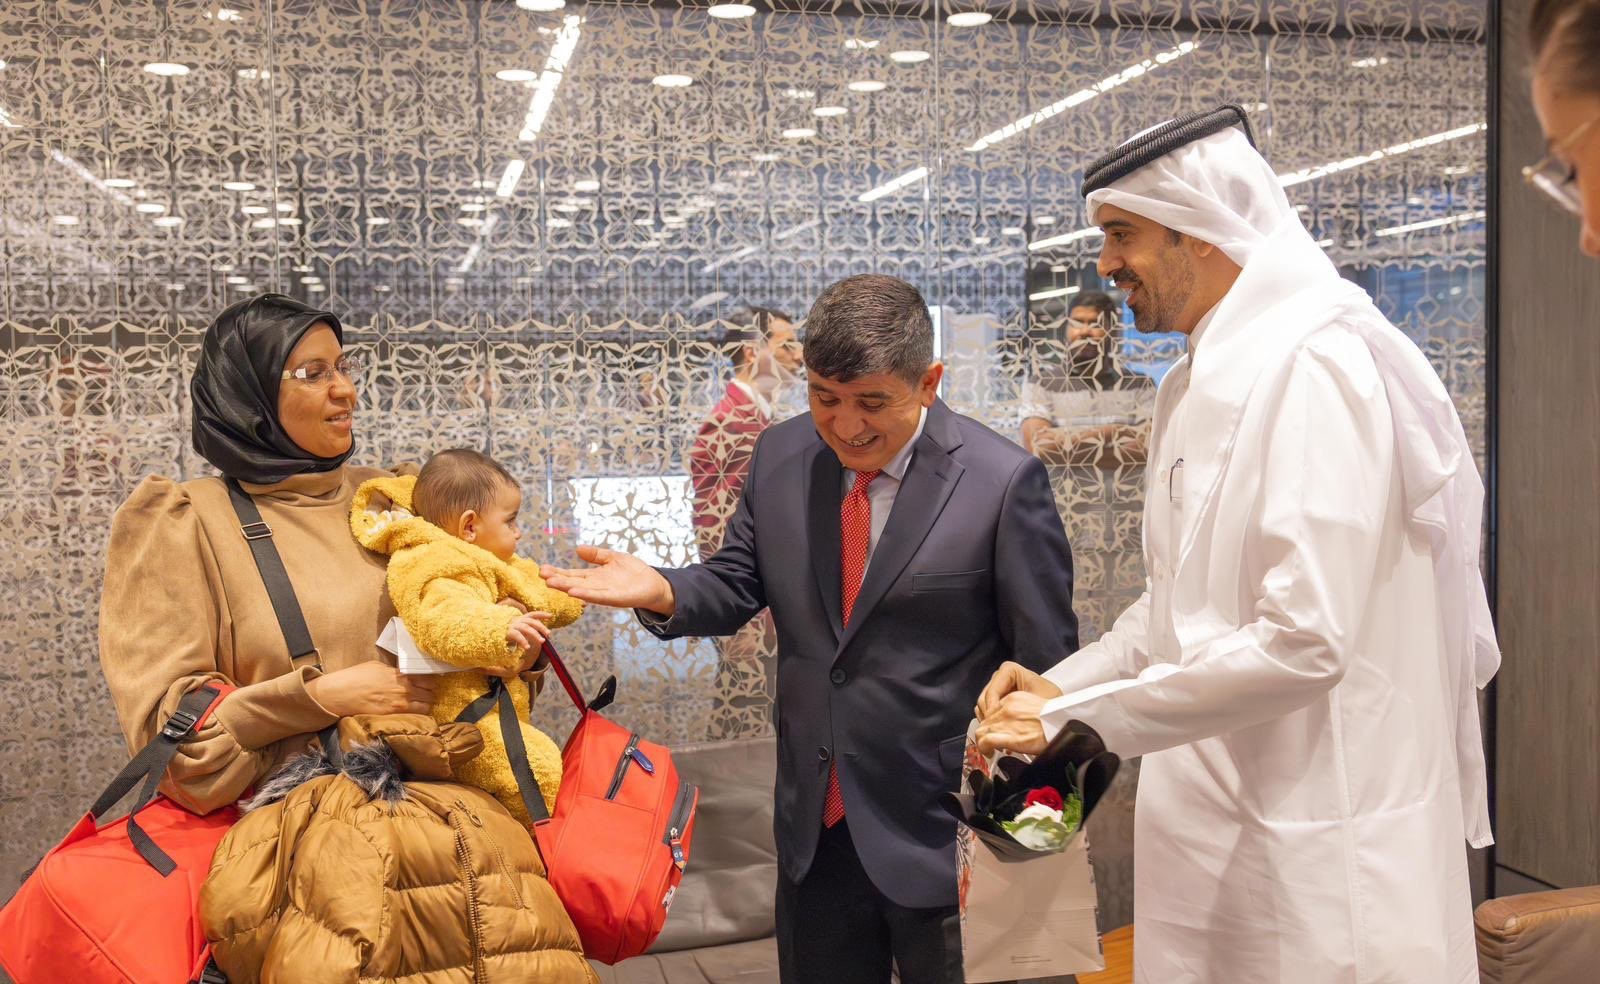 Wounded people from the Gaza Strip seeking treatment in Turkey with their relatives in Doha